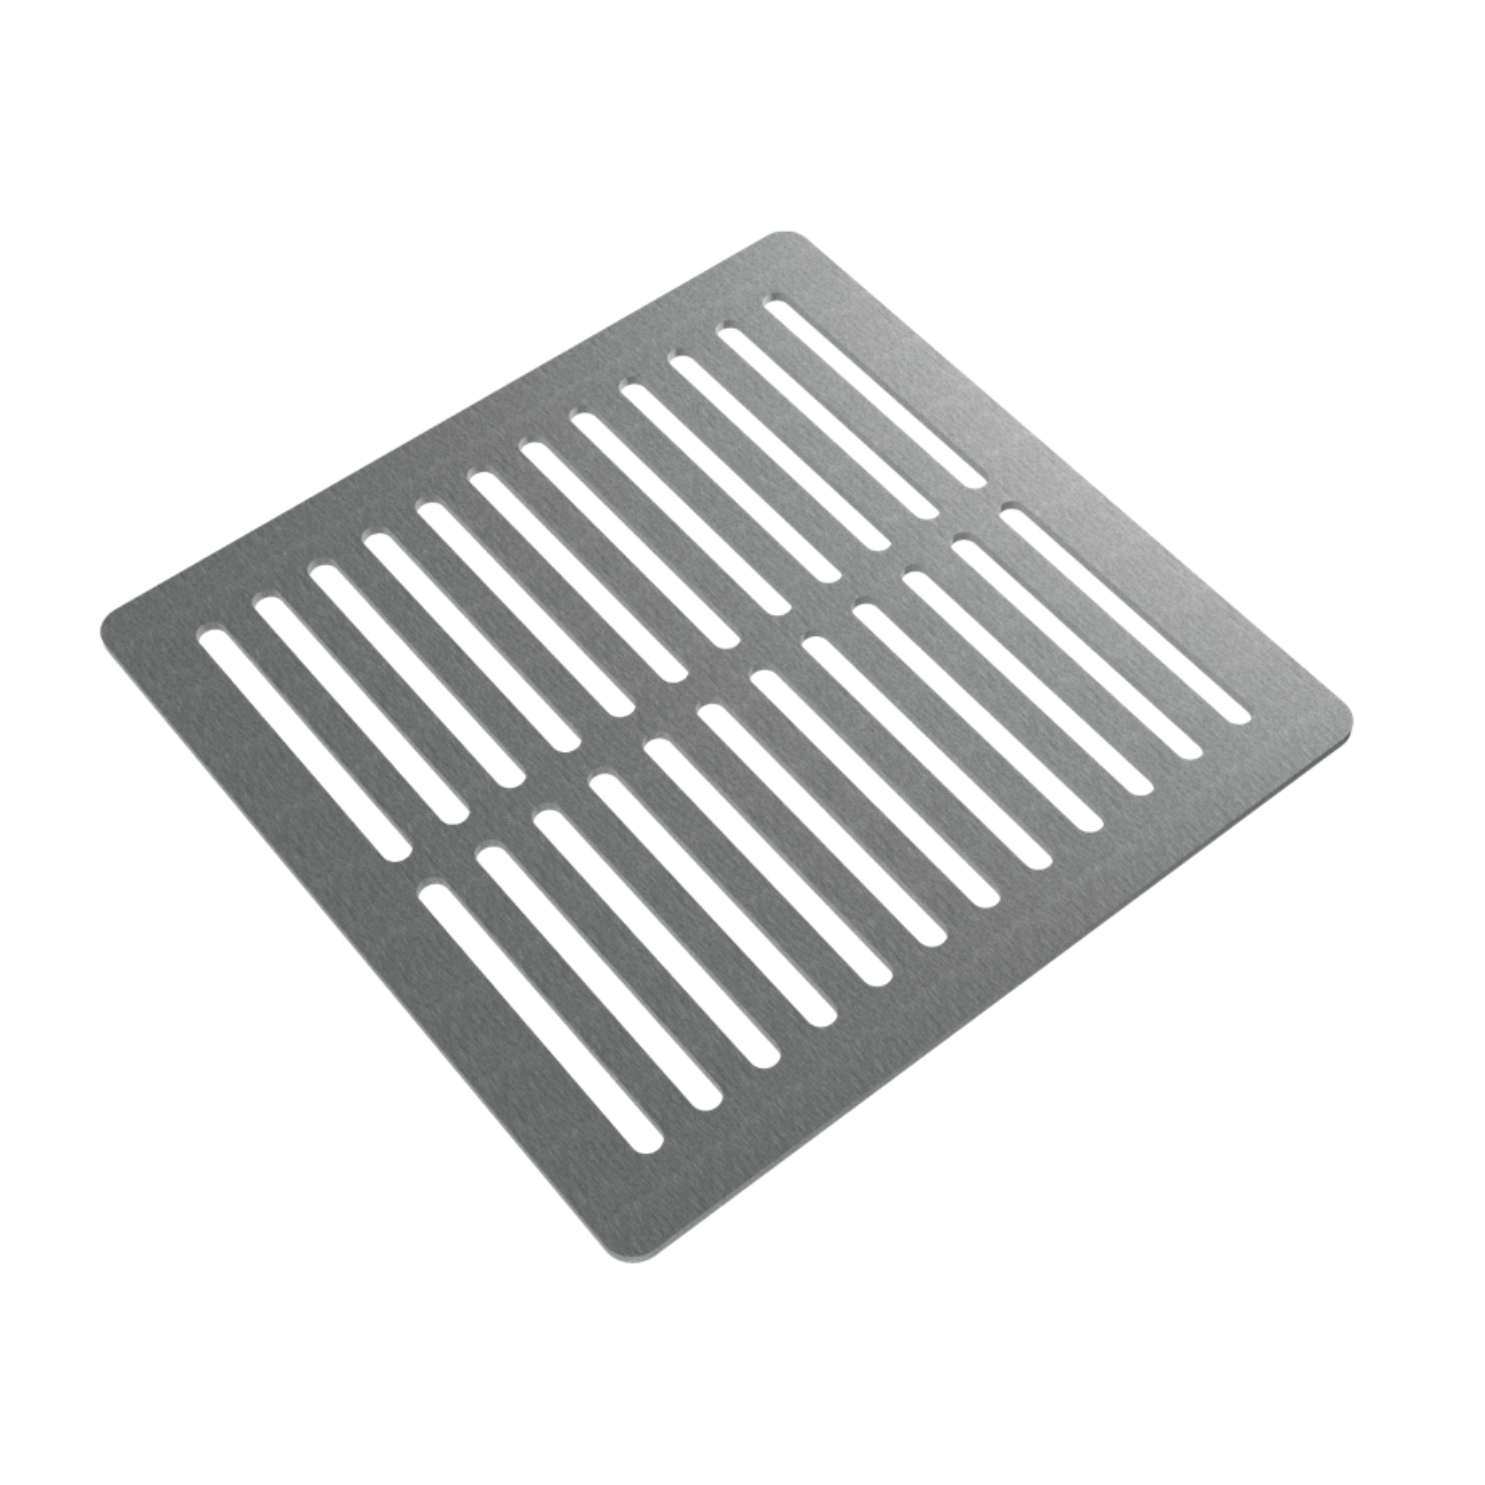 Standard Slotted 304 Stainless Steel Grating with Black Plastic Gully Ø110mm Spigot (148 x 148mm)